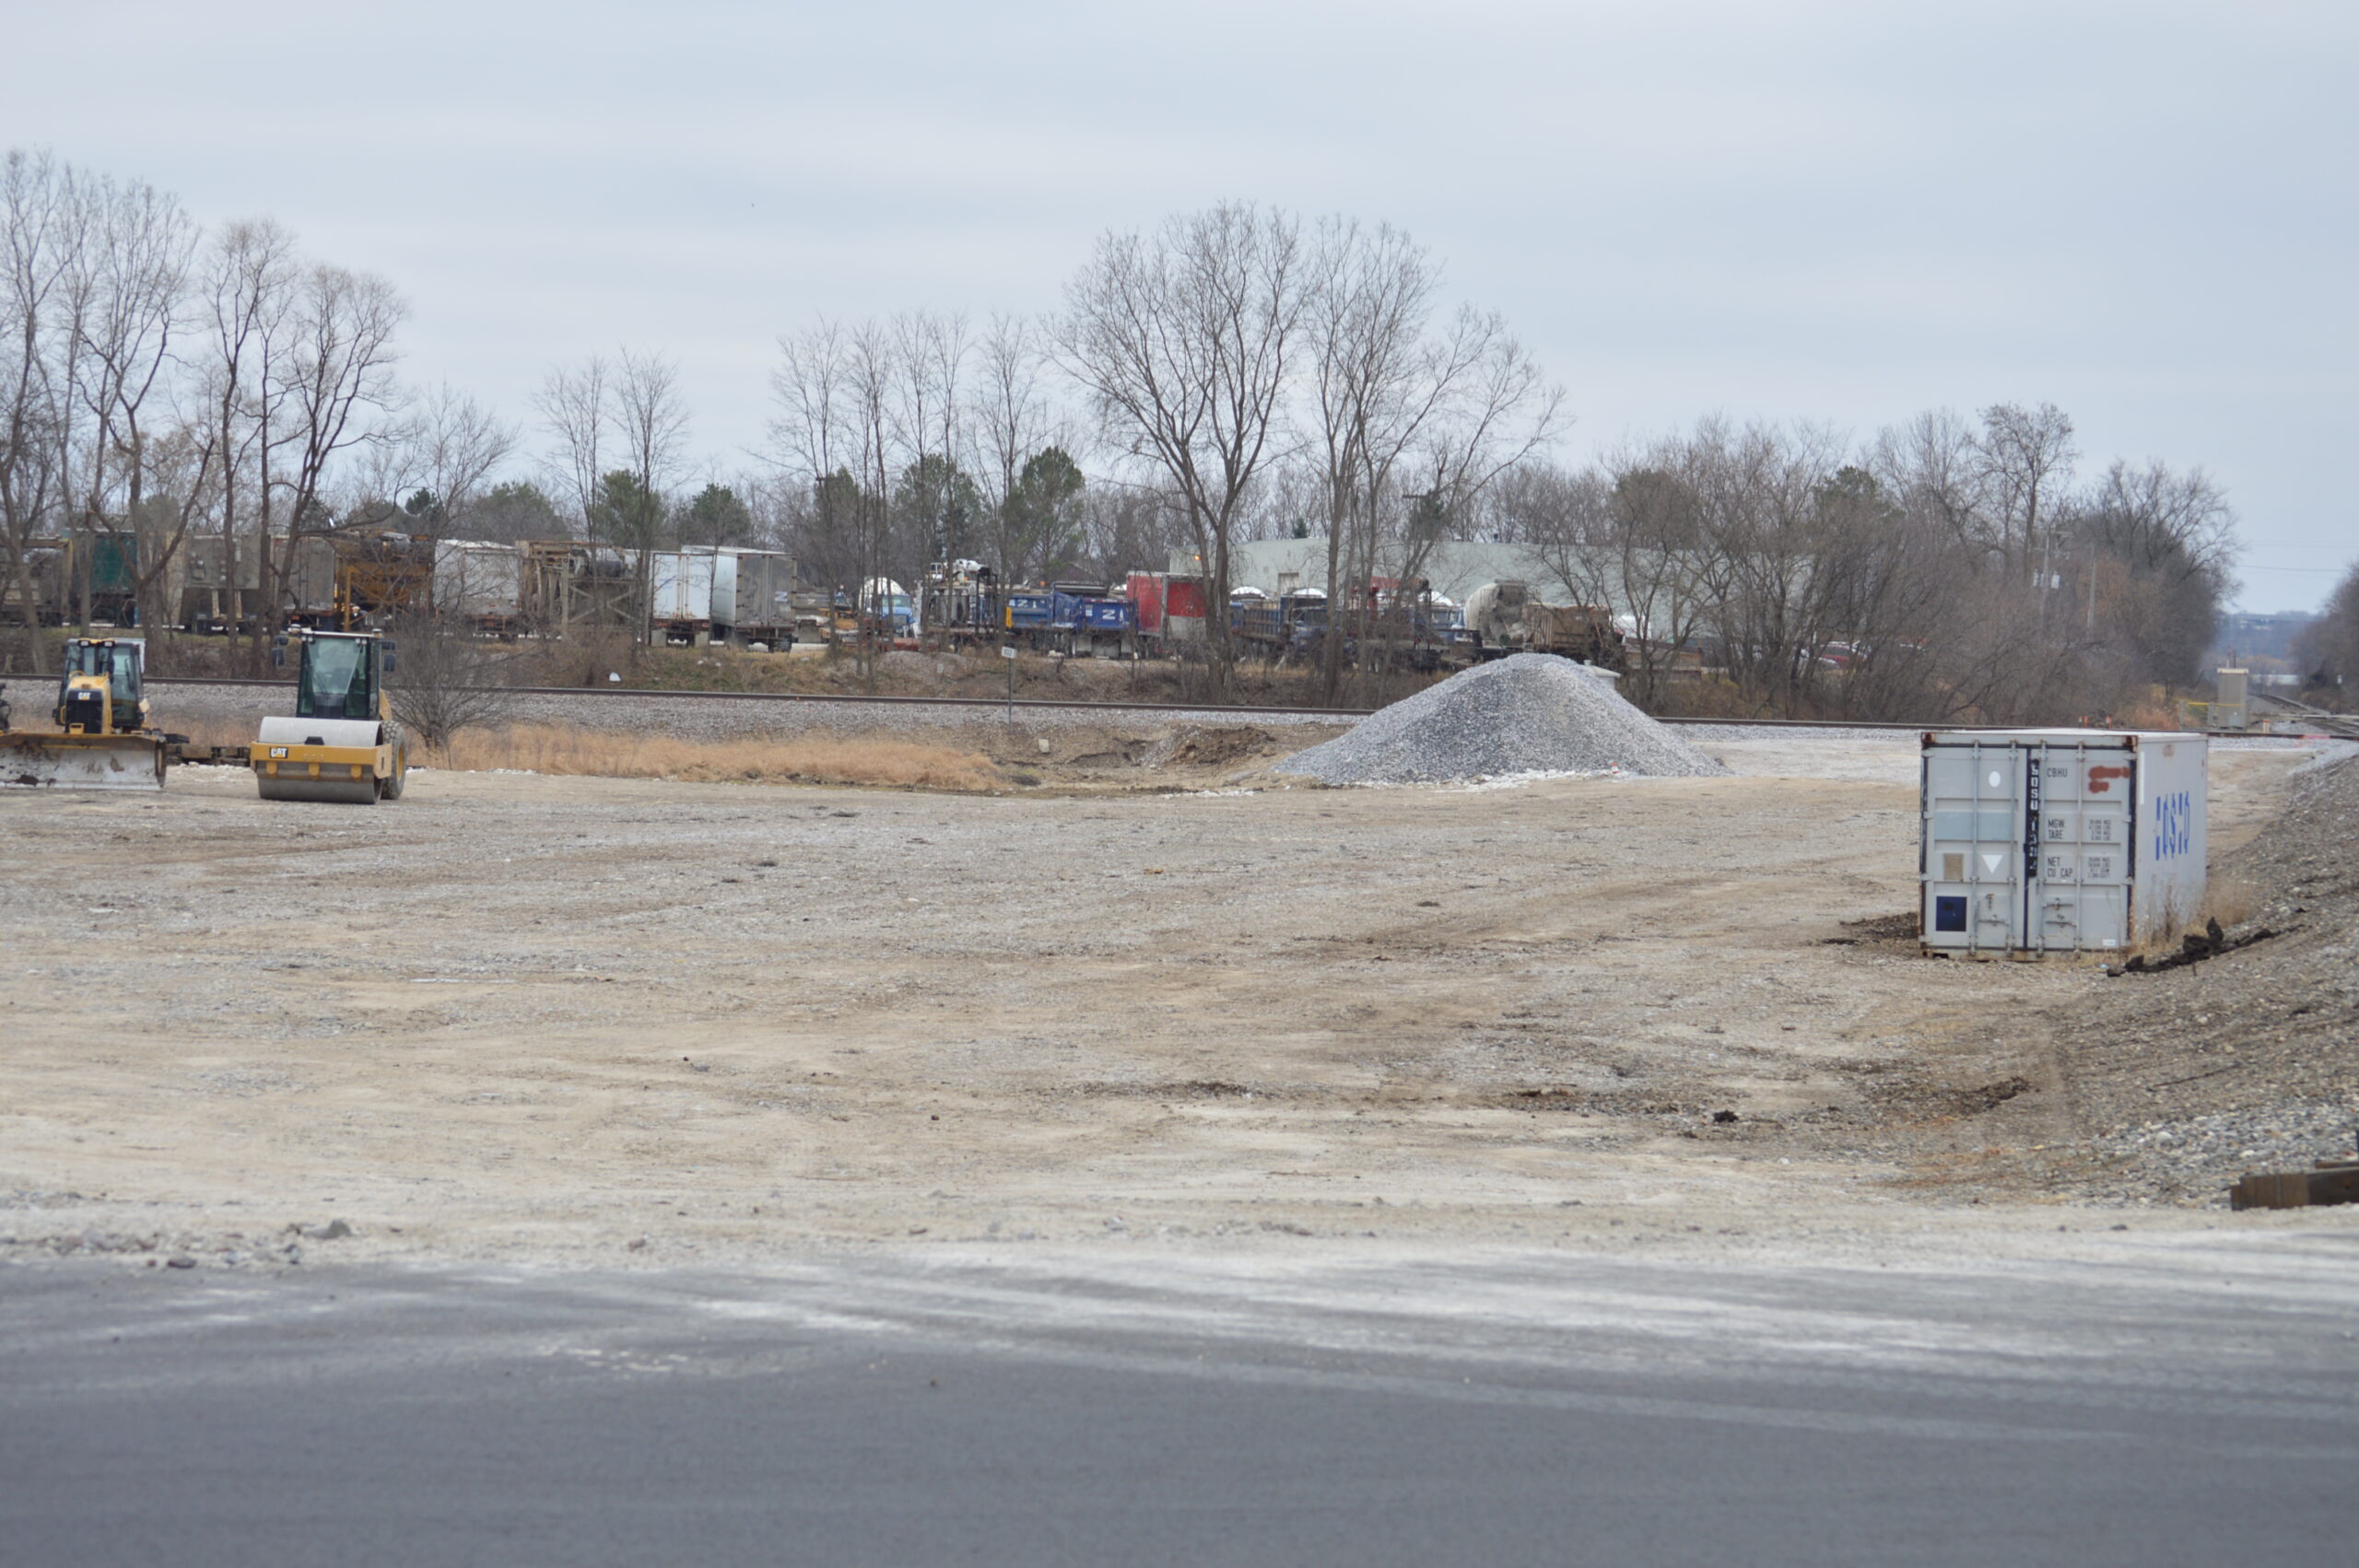 An empty staging yard with only a bulldozer and road roller, a large pile of gravel, and a gray construction container sitting in it on a gray day.